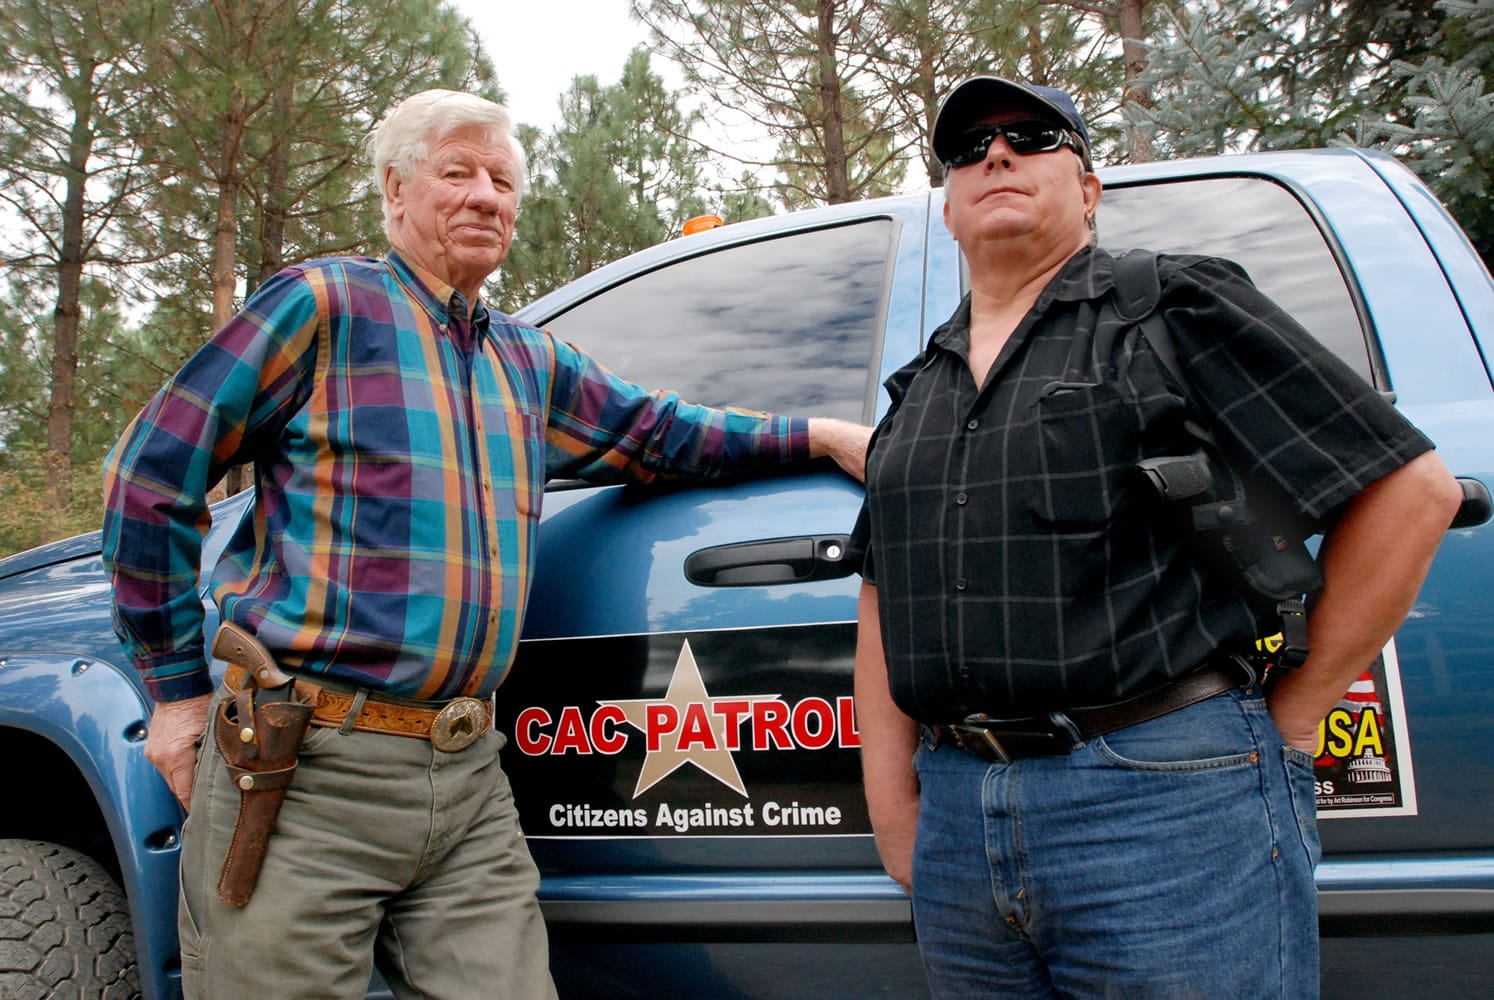 Photos by Jeff Barnard/Associated Press
Sam Nichols, left, and Glenn Woodbury stand in front of Woodbury's pickup in O'Brien, Ore. The two men are part of a newly-formed neighborhood watch that does armed patrols around the rural area to deter crime.